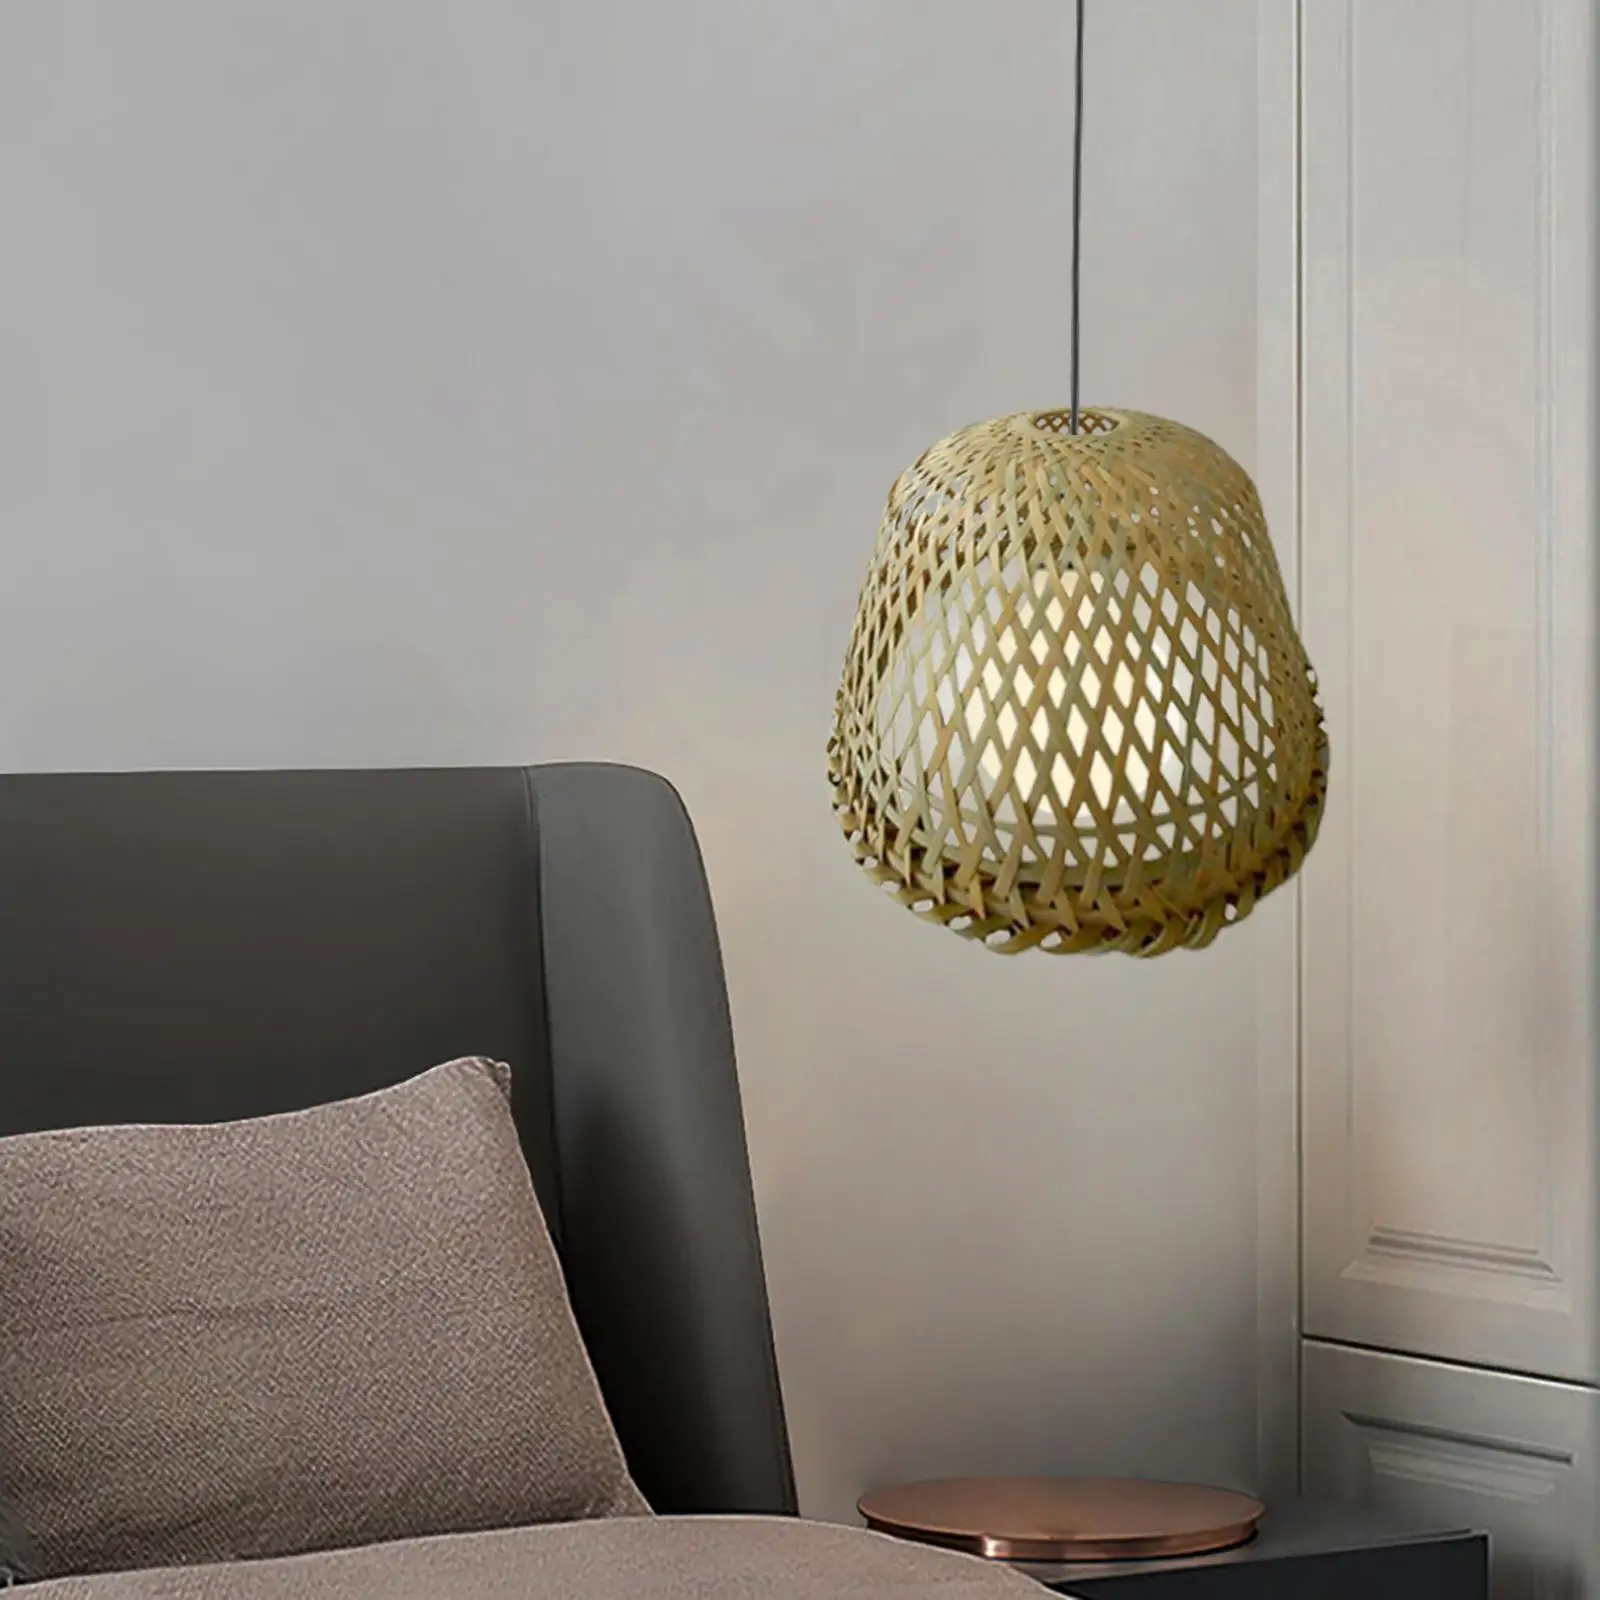 Bamboo Lamp Shade Woven Ceiling Light Shade Hanging Pendant Light Cover Hollow Out Chandeliers Lampshade for Office Home Decor